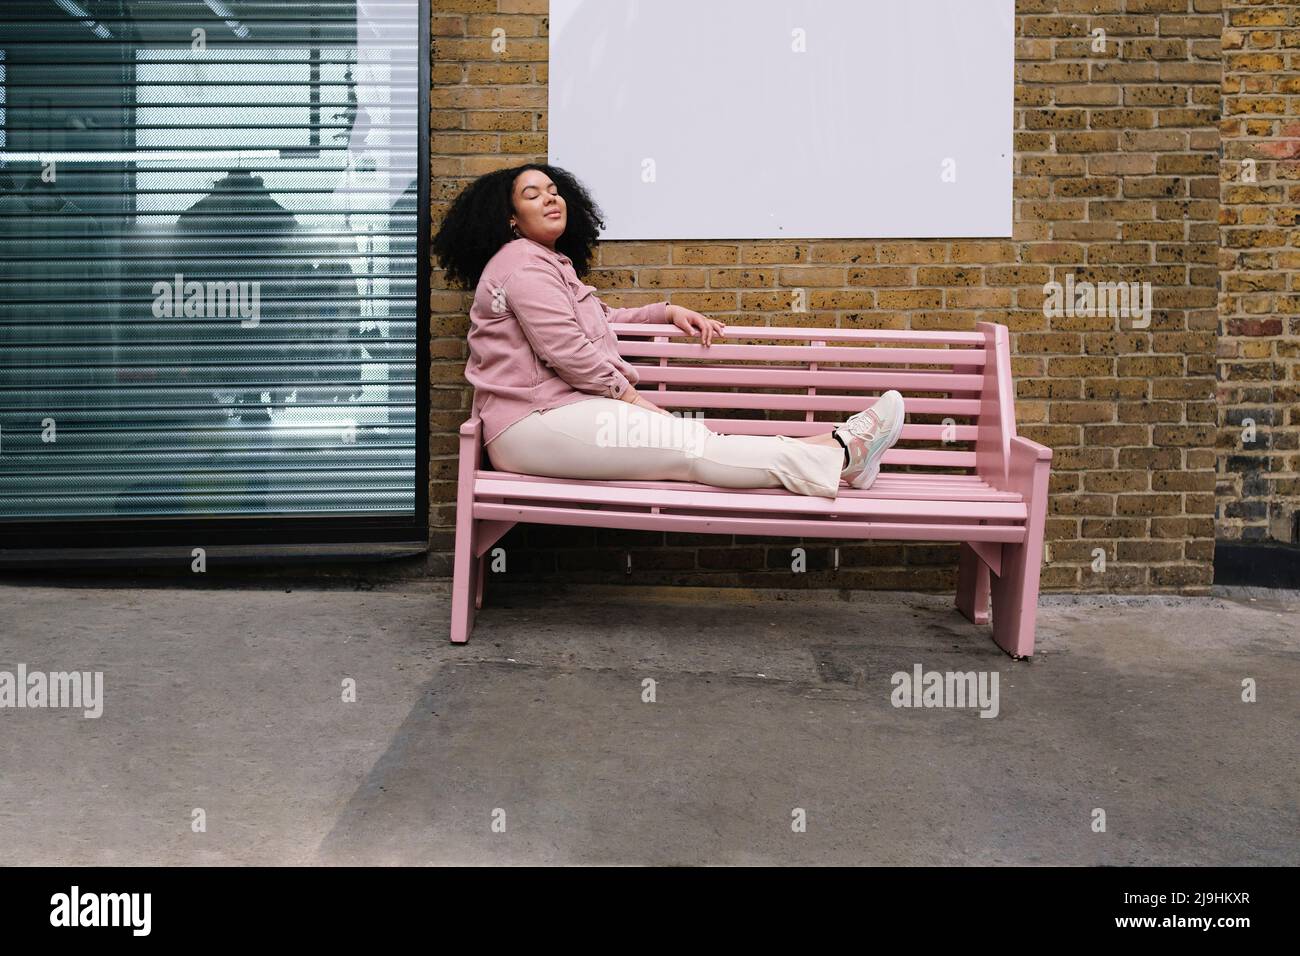 Young woman with eyes closed sitting on pink bench Stock Photo